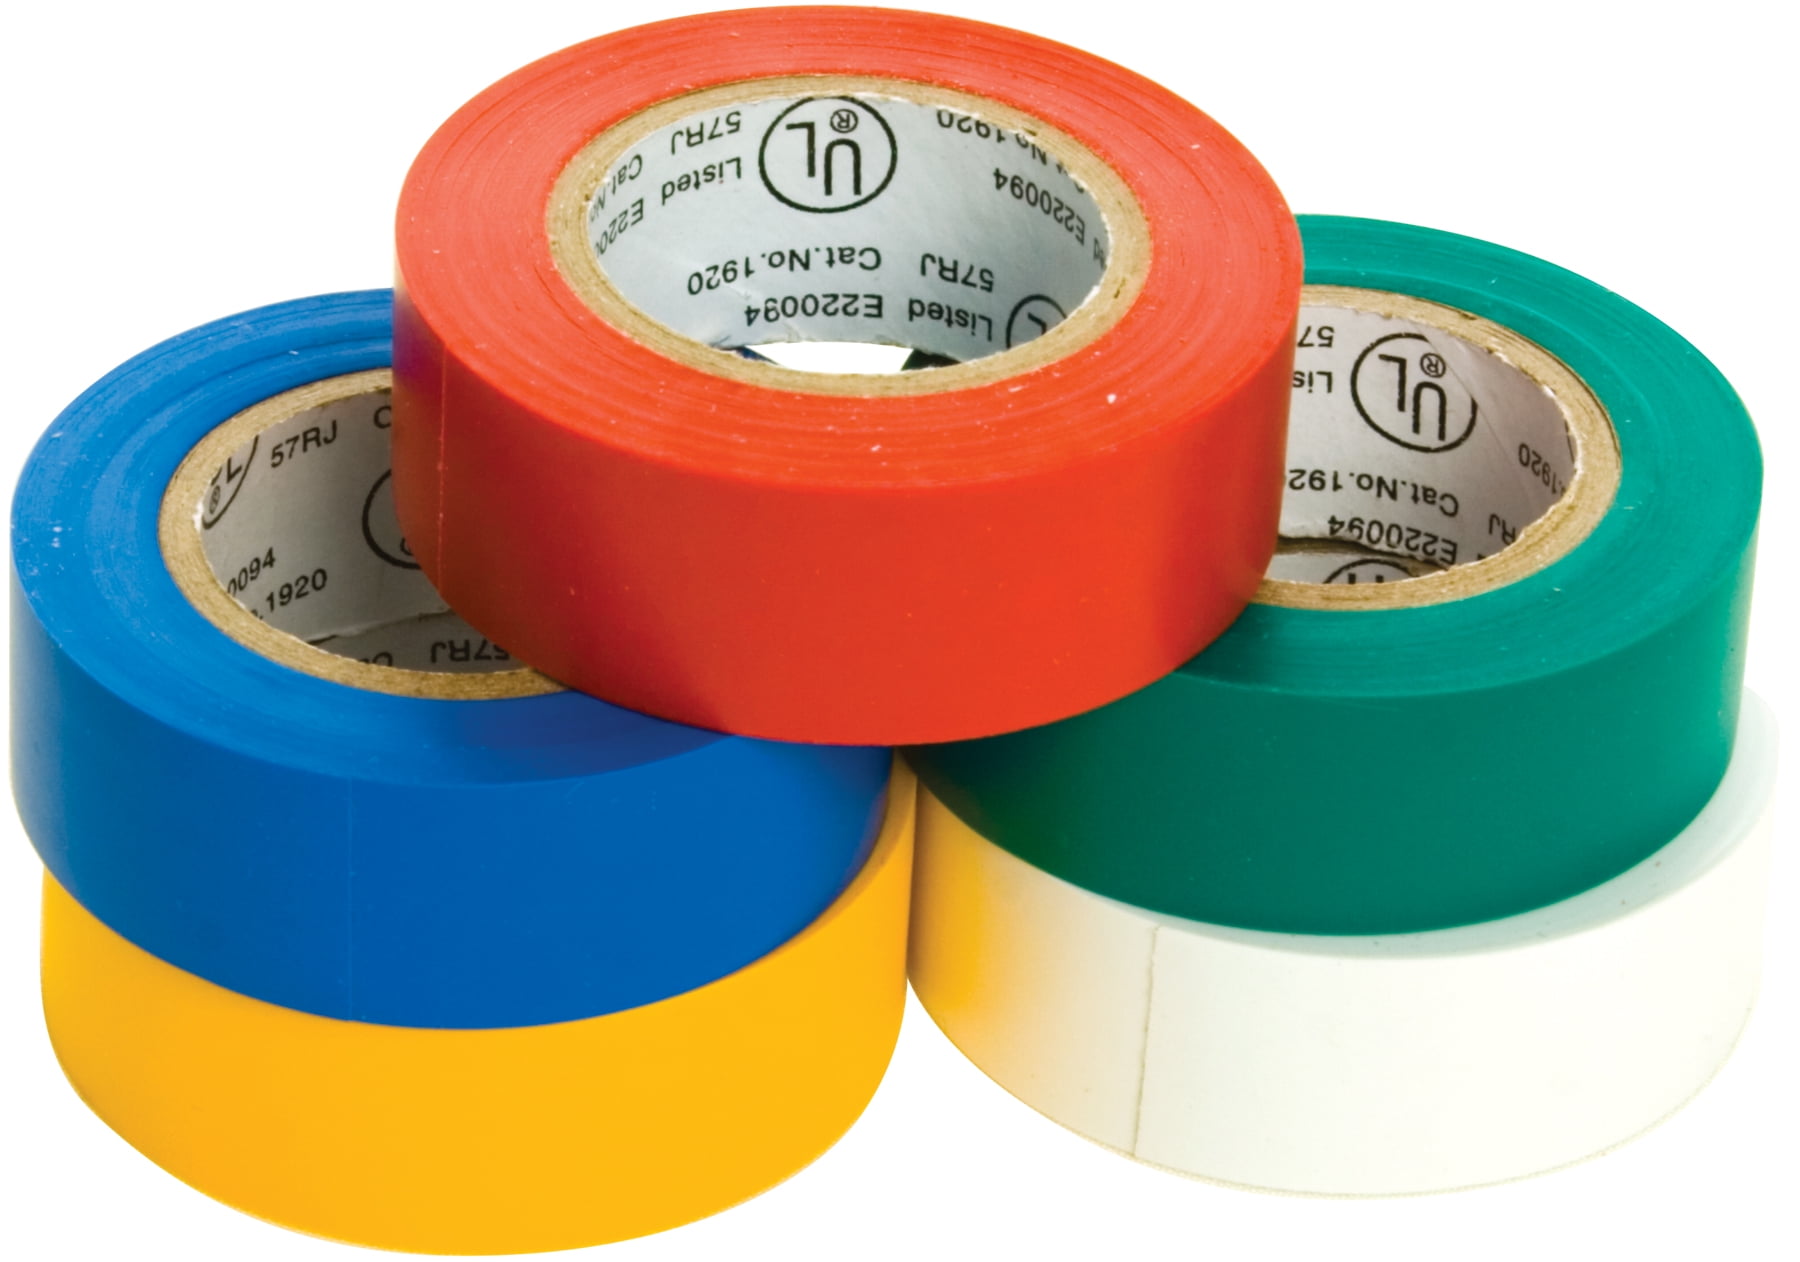 5PK COLORED ELECTRICAL TAPE 